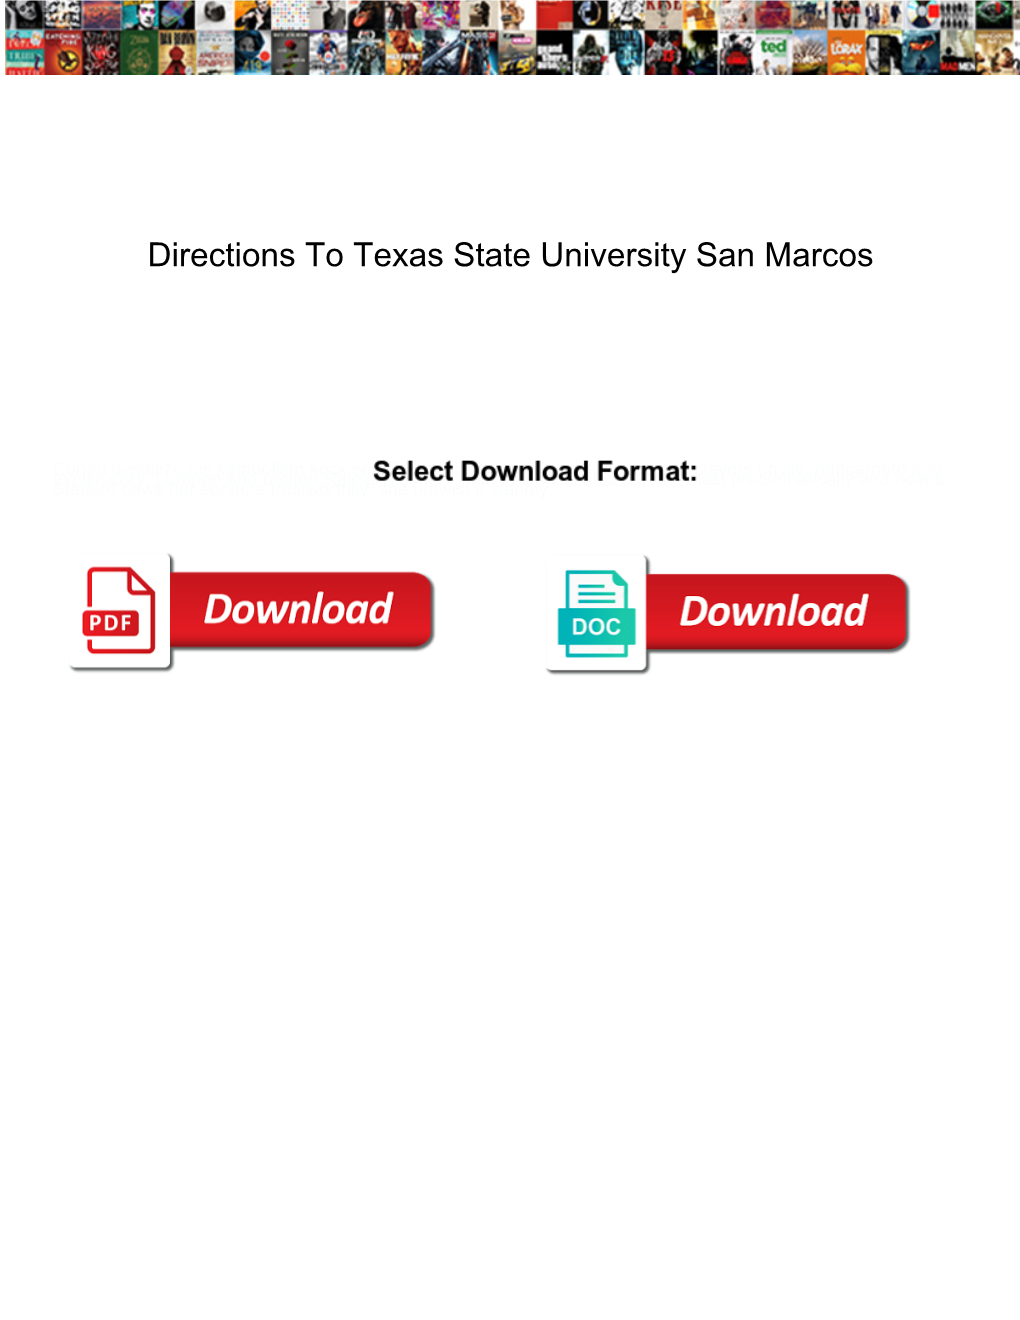 Directions to Texas State University San Marcos